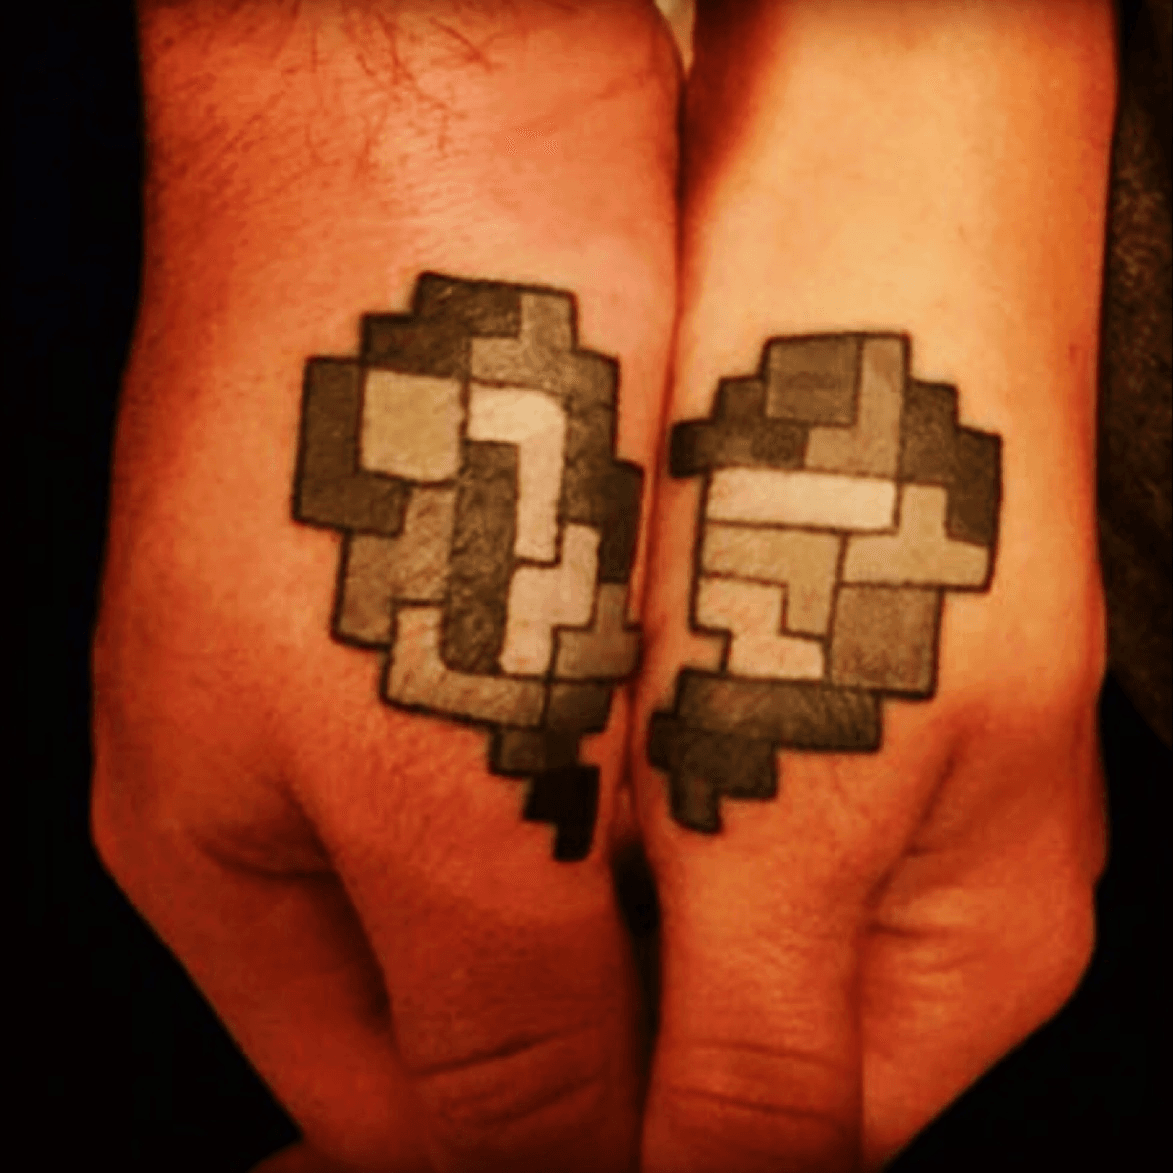 Tattoo uploaded by David Valencia • Tetris half heart on my hand and the  other half on my girls. When we hold hands it completes the whole heart.  The different tetris colors